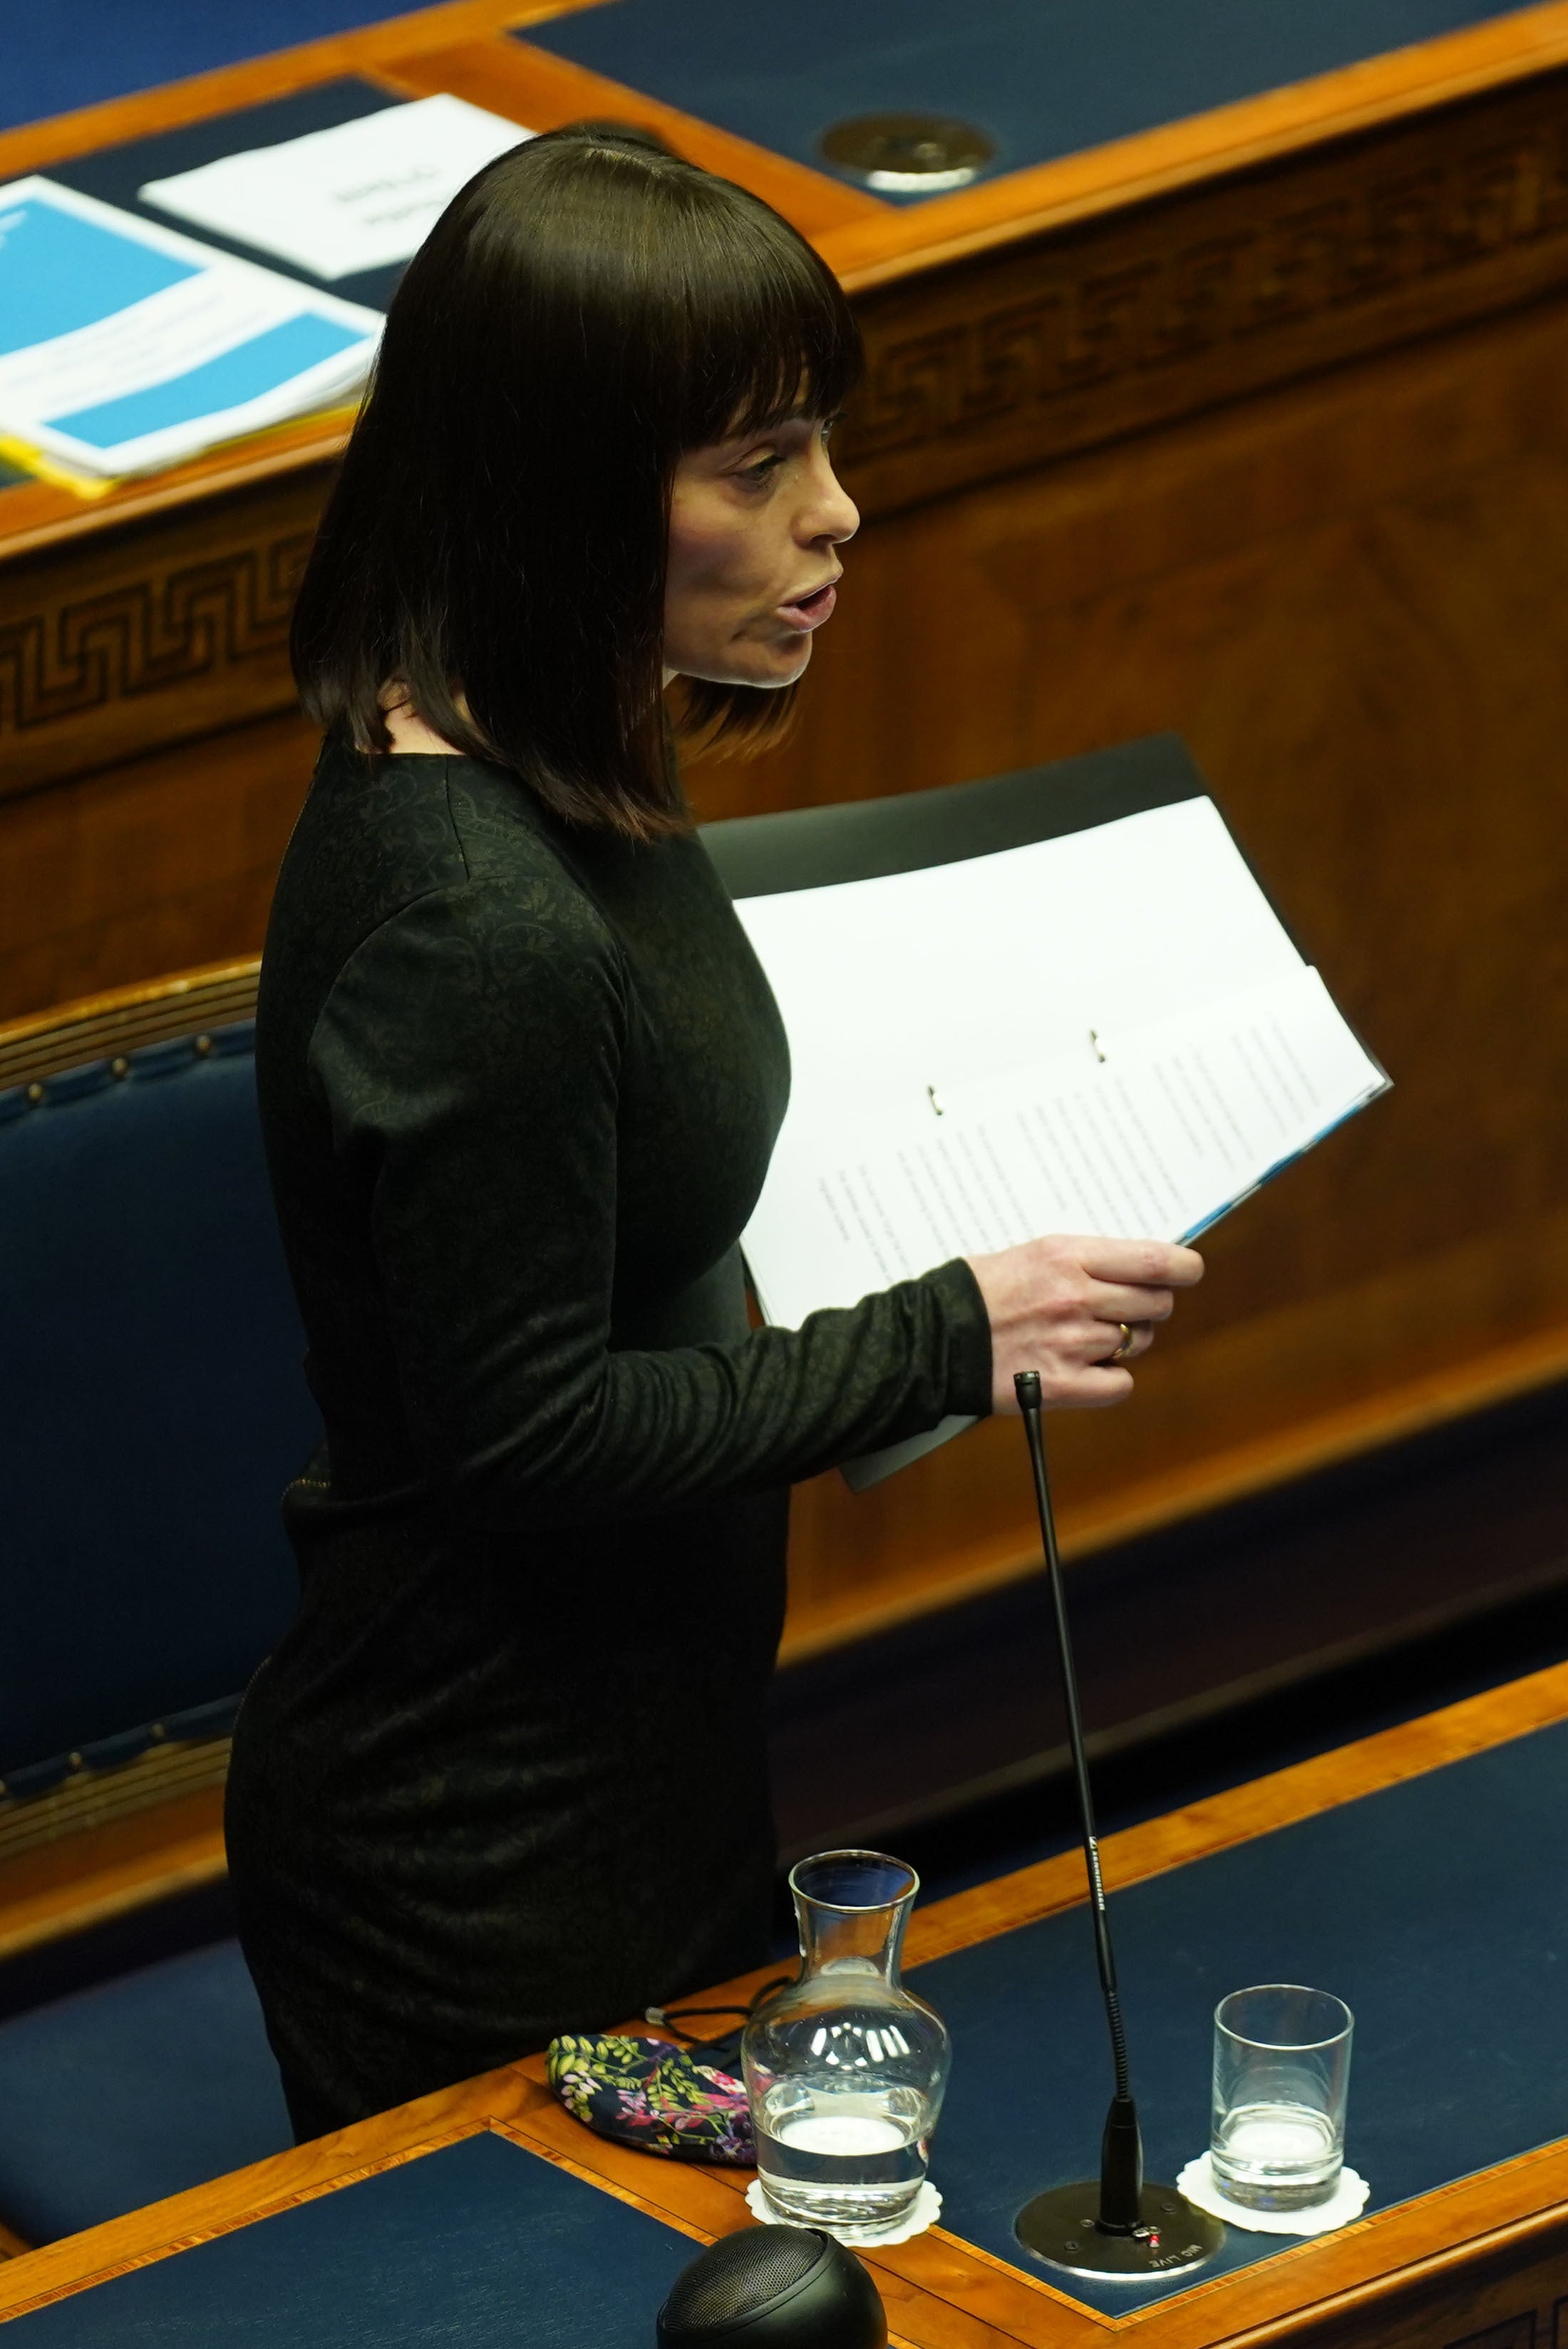 SDLP infrastructure minister Nichola Mallon speaks in the Northern Ireland Assembly chamber at Stormont during the delivery of the long-awaited public apology to the victims of historical institutional abuse (Brian Lawless/PA)